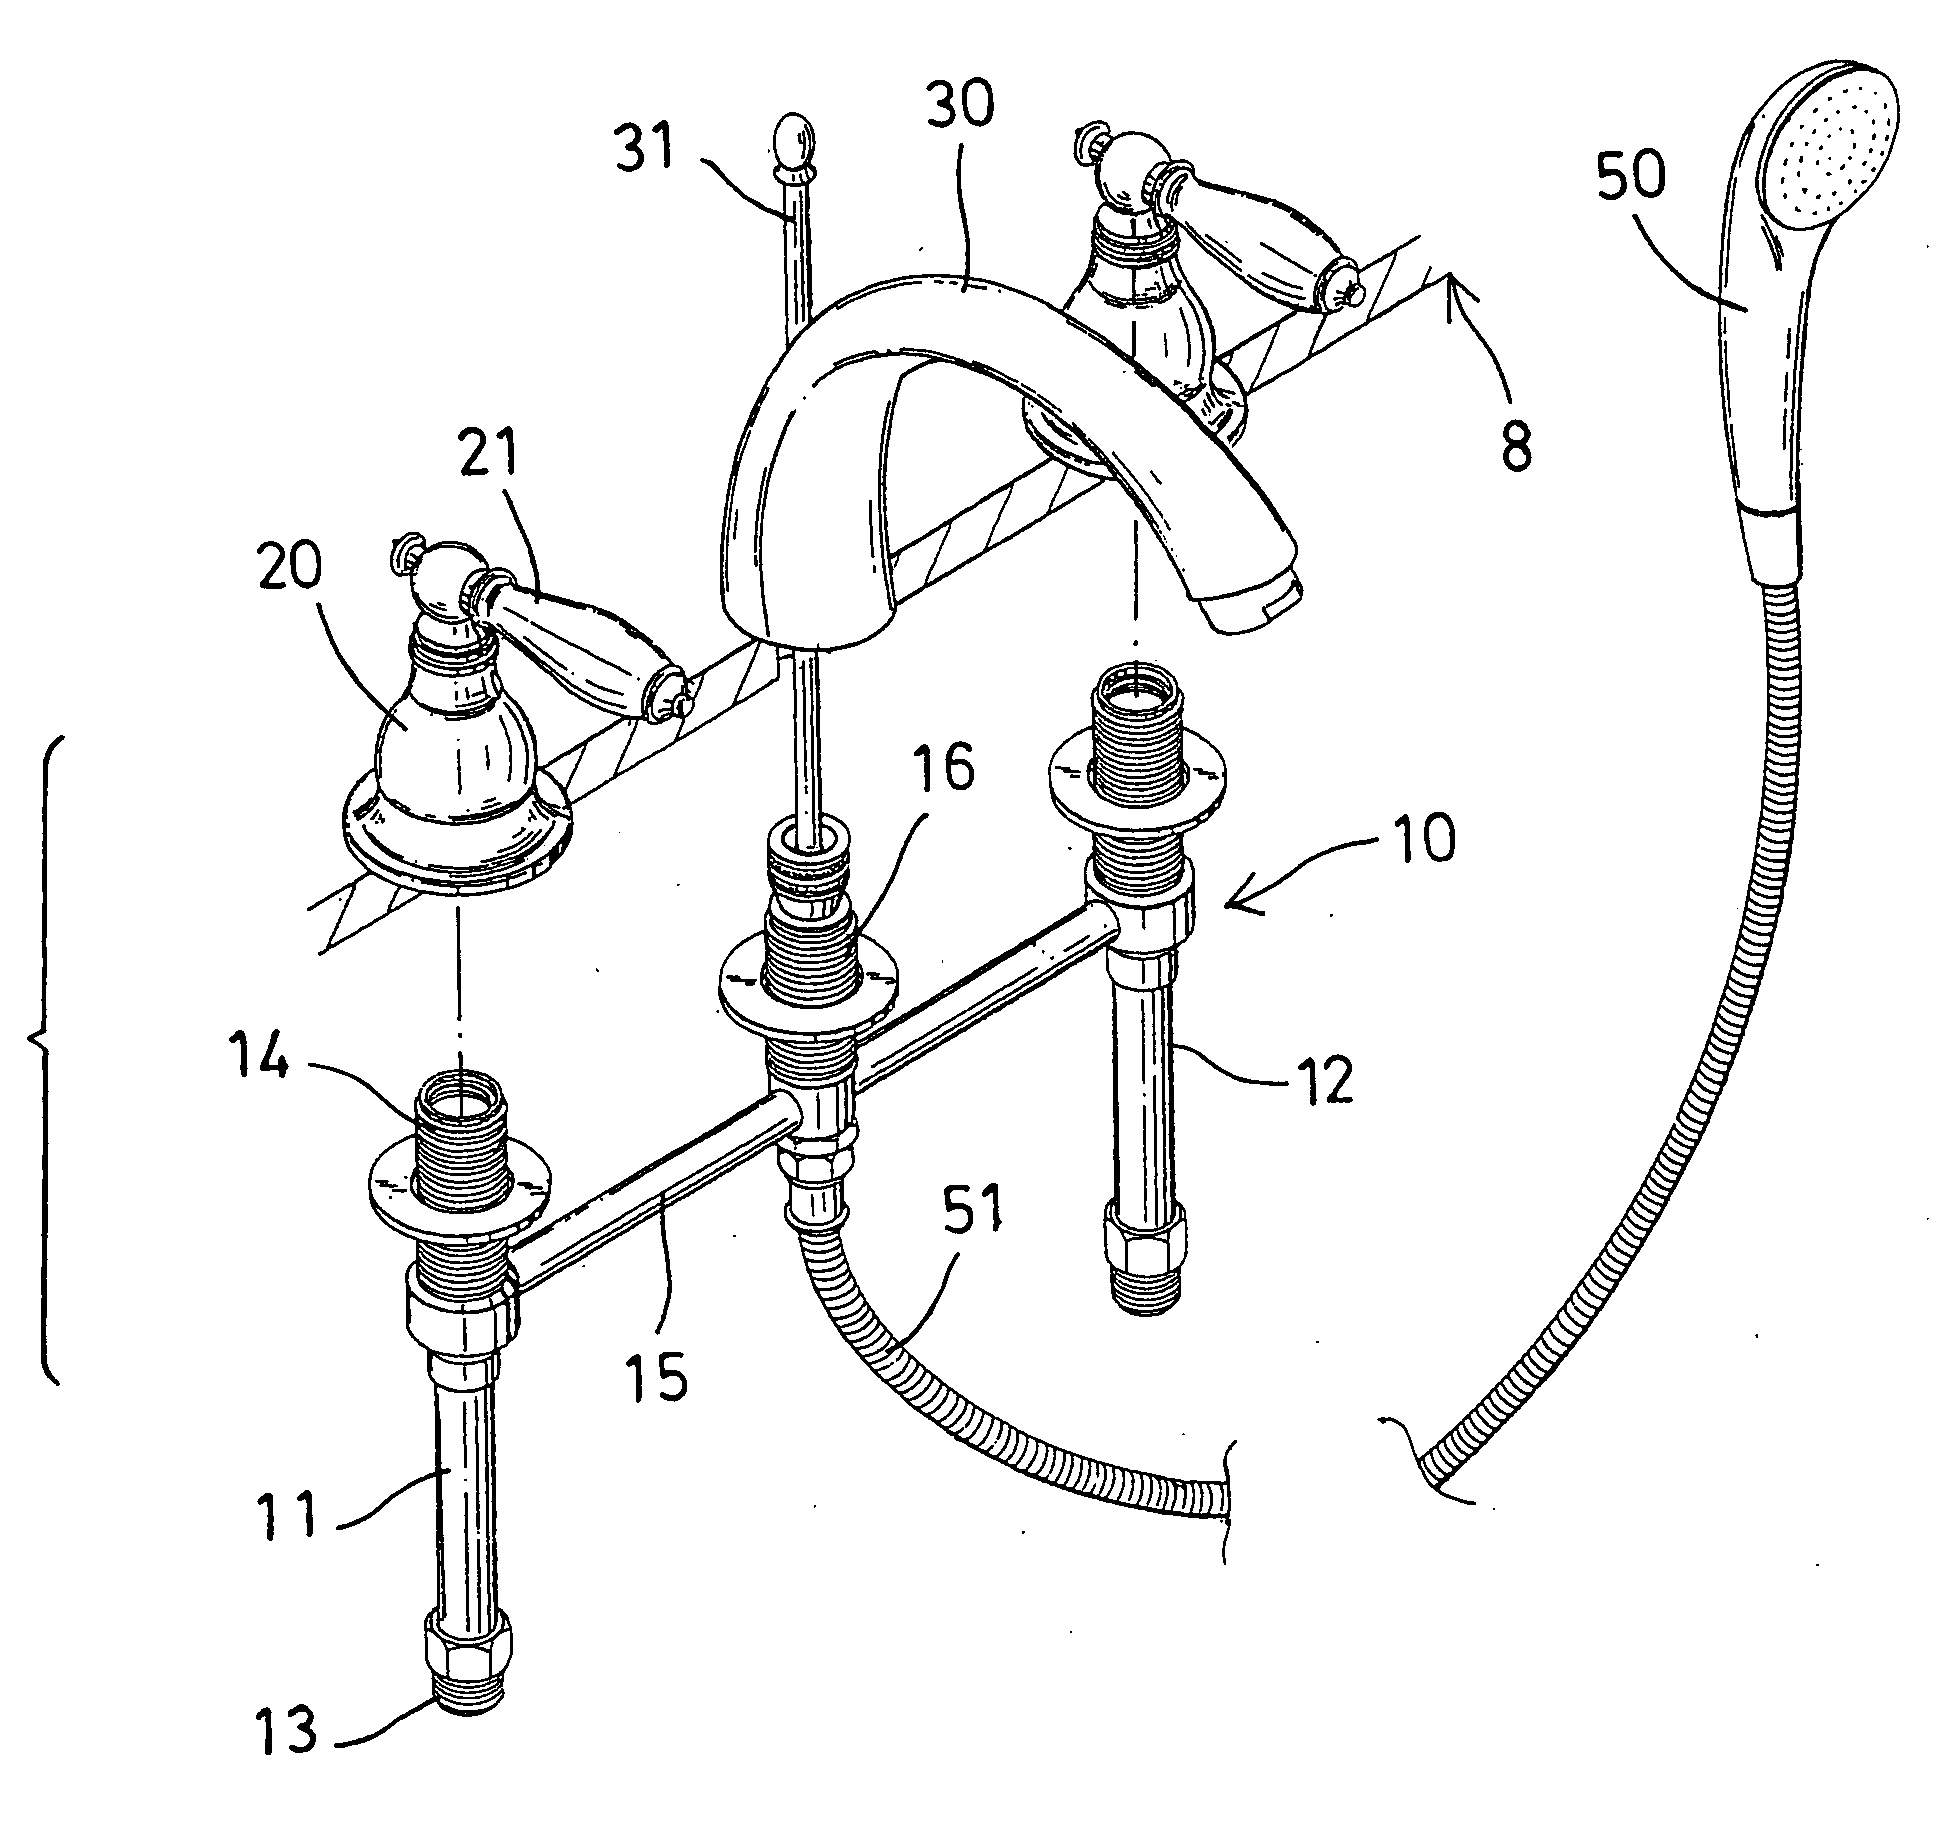 Faucet Device Background of the invention